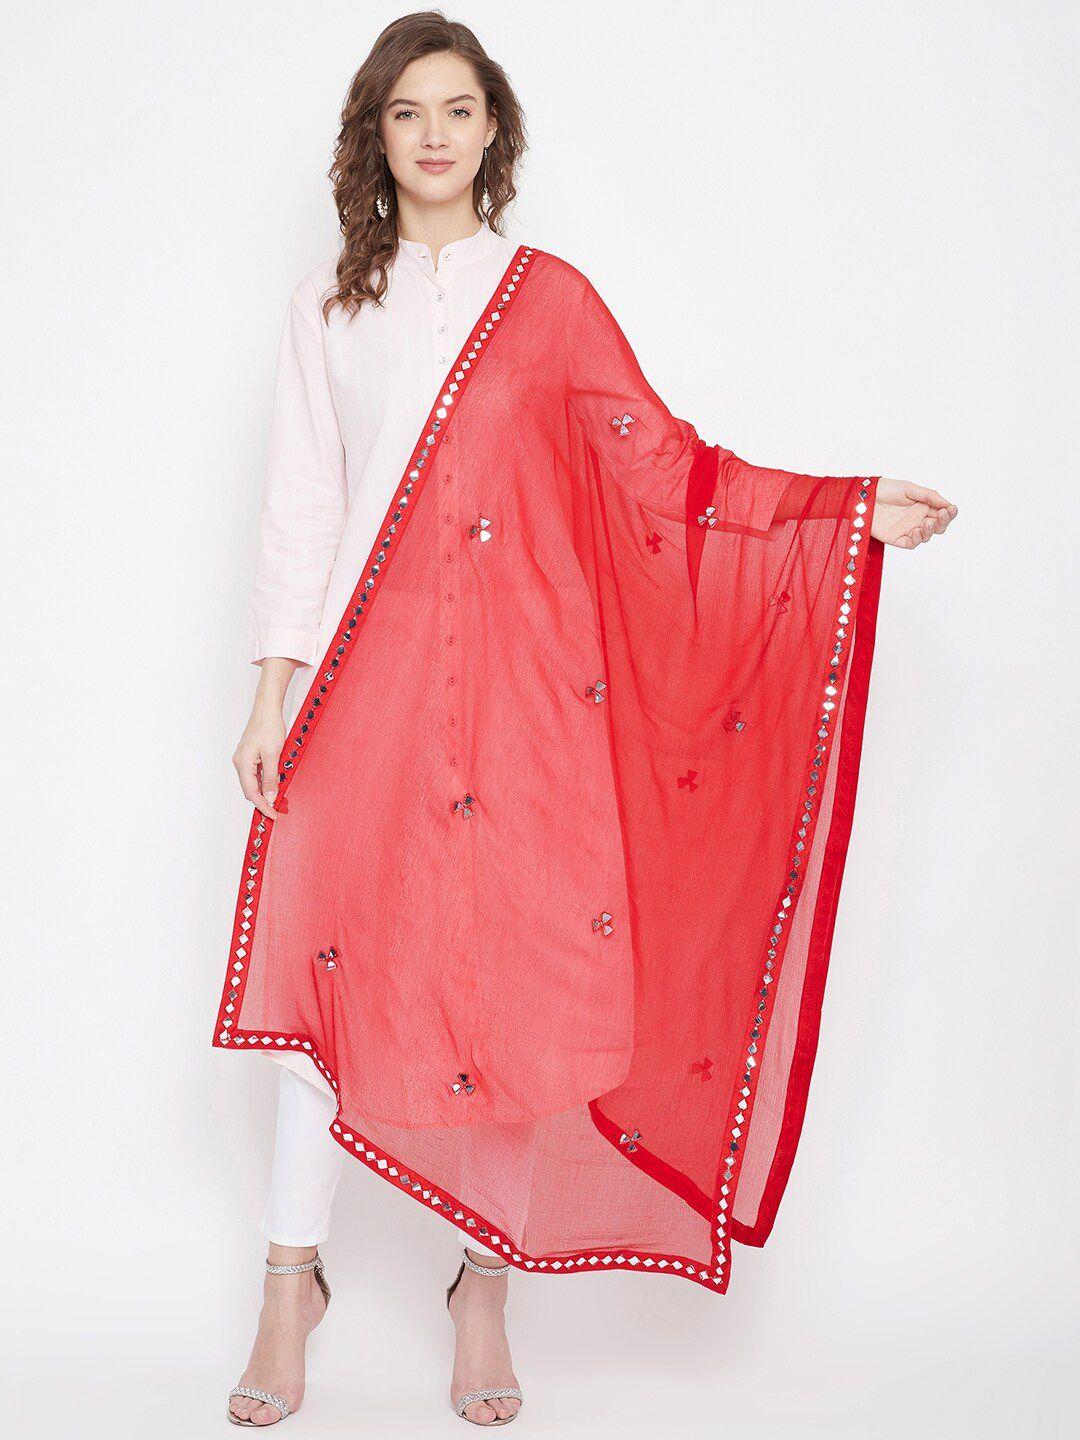 clora creation red & silver-toned embroidered mirror work dupatta